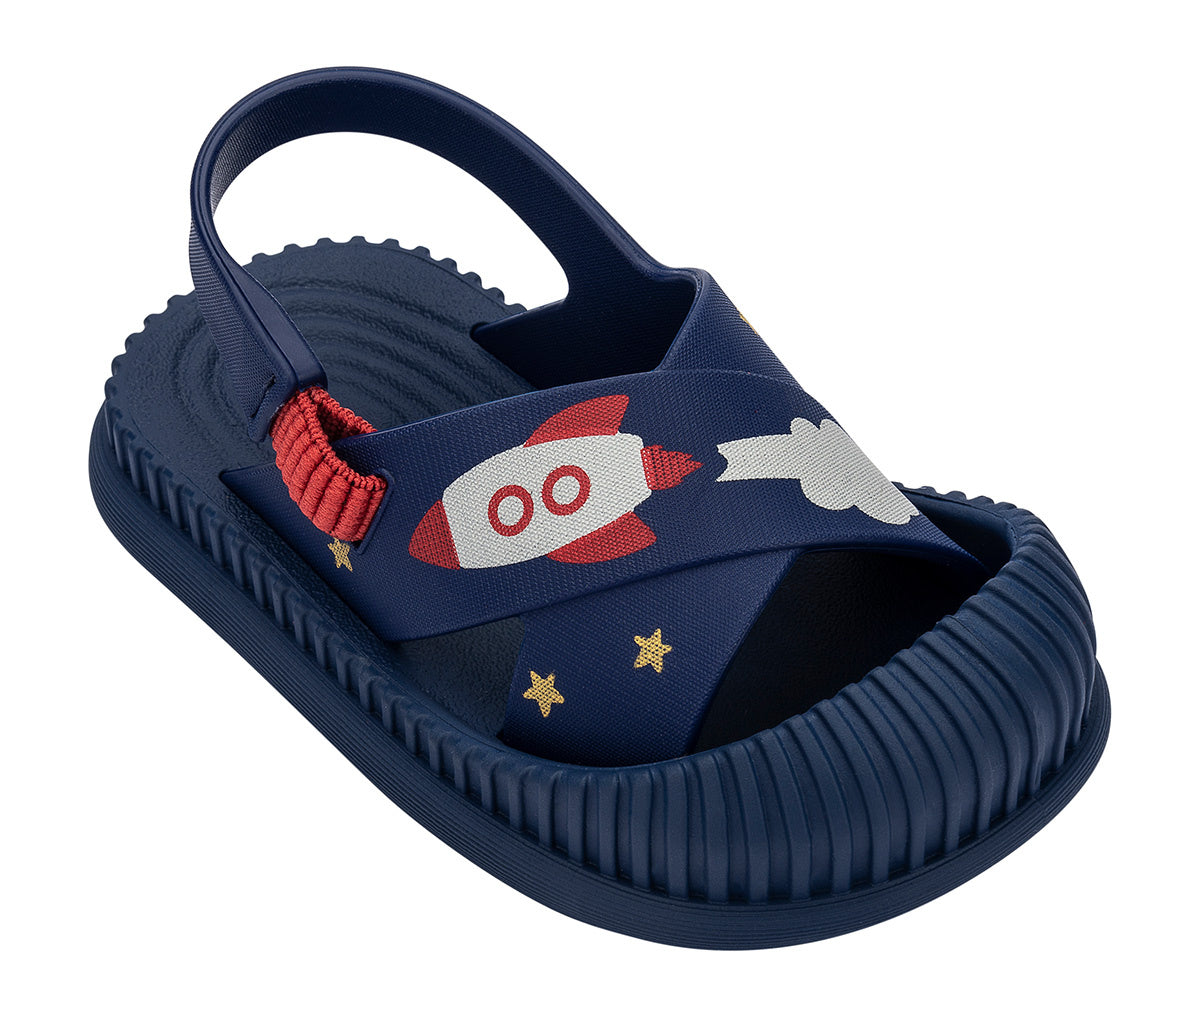 Angled view of a blue Ipanema Cute baby sandal with rocket ship on the strap.